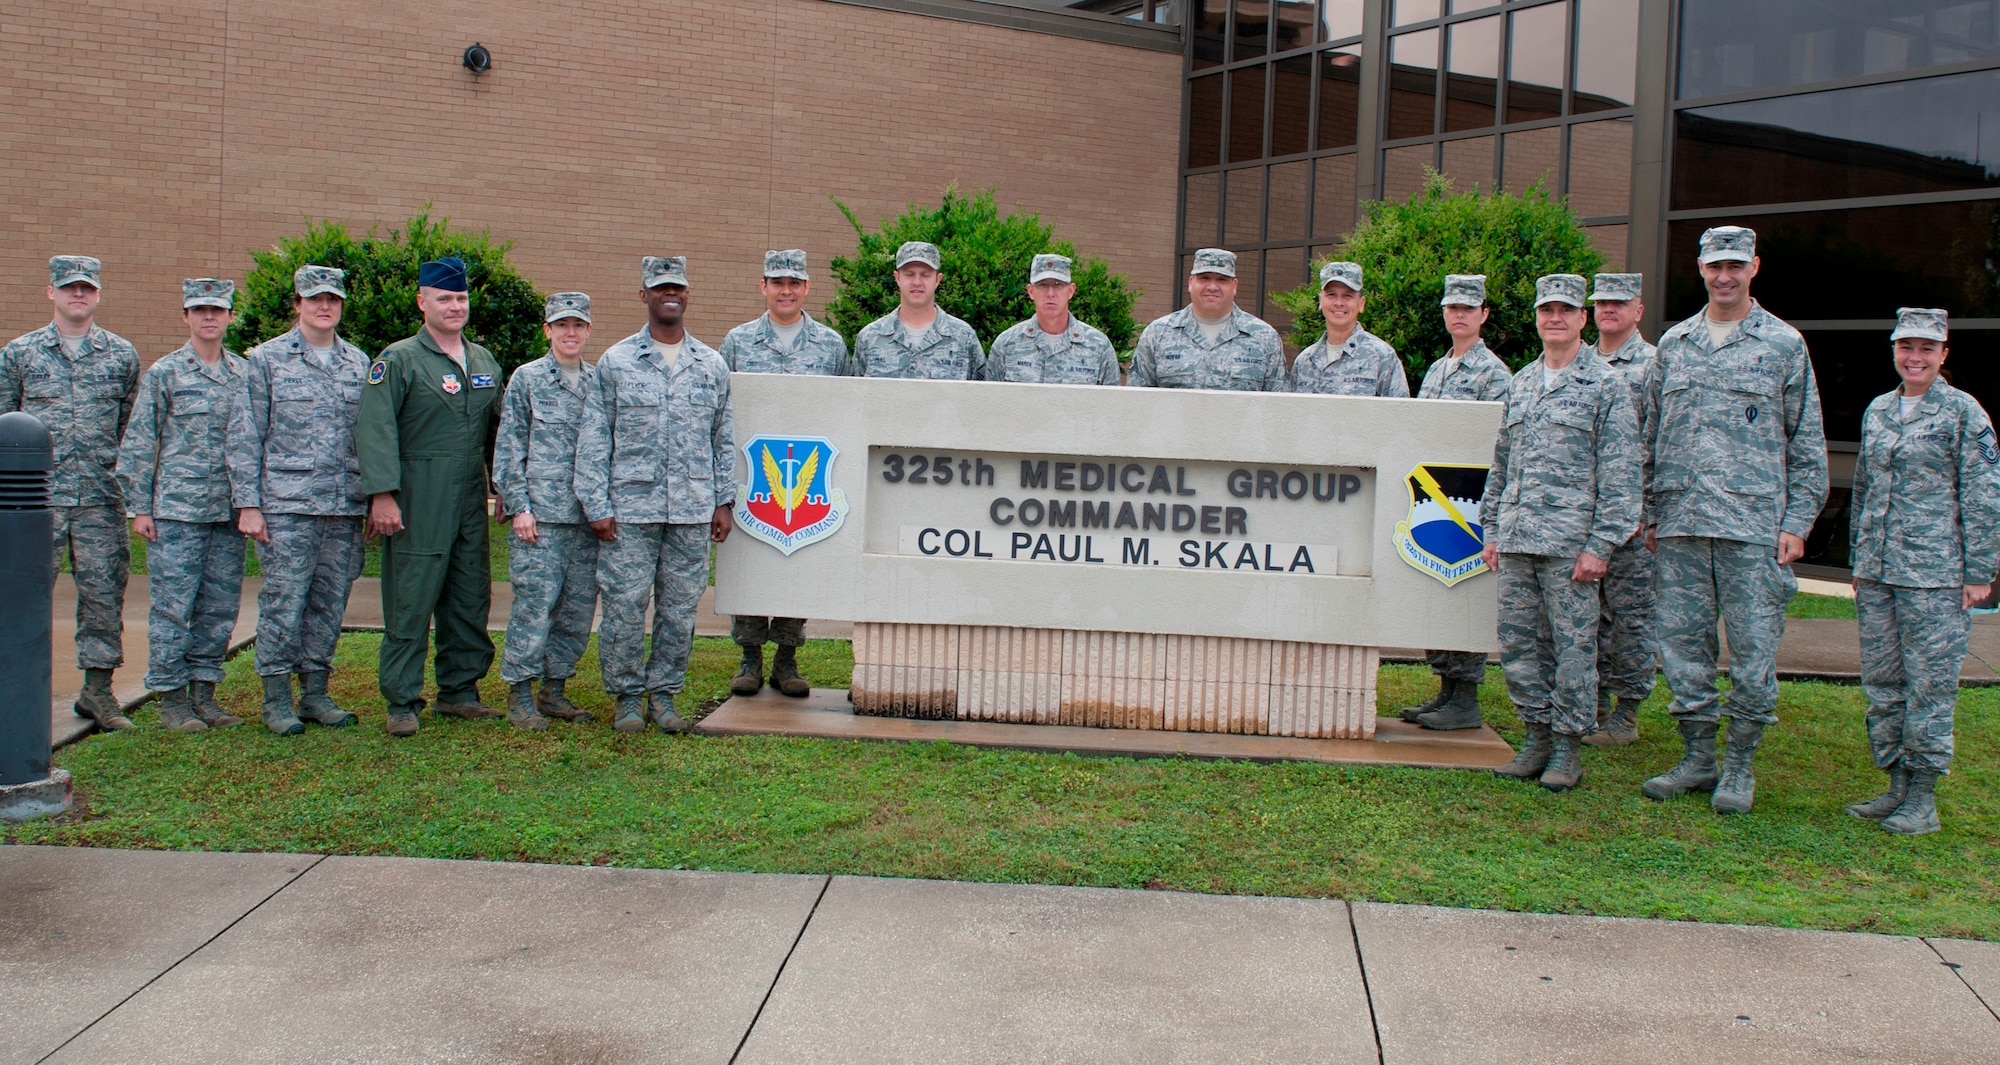 Brig. Gen. (Dr.) Sean L. Murphy, Air Force Medical Operations Agency commander from Lackland Air Force Base, Texas, posed with the 325th Medical Group leadership prior to his tour of the group's facilities May 3, 2013. (U.S. Air Force photo by Lisa Norman)